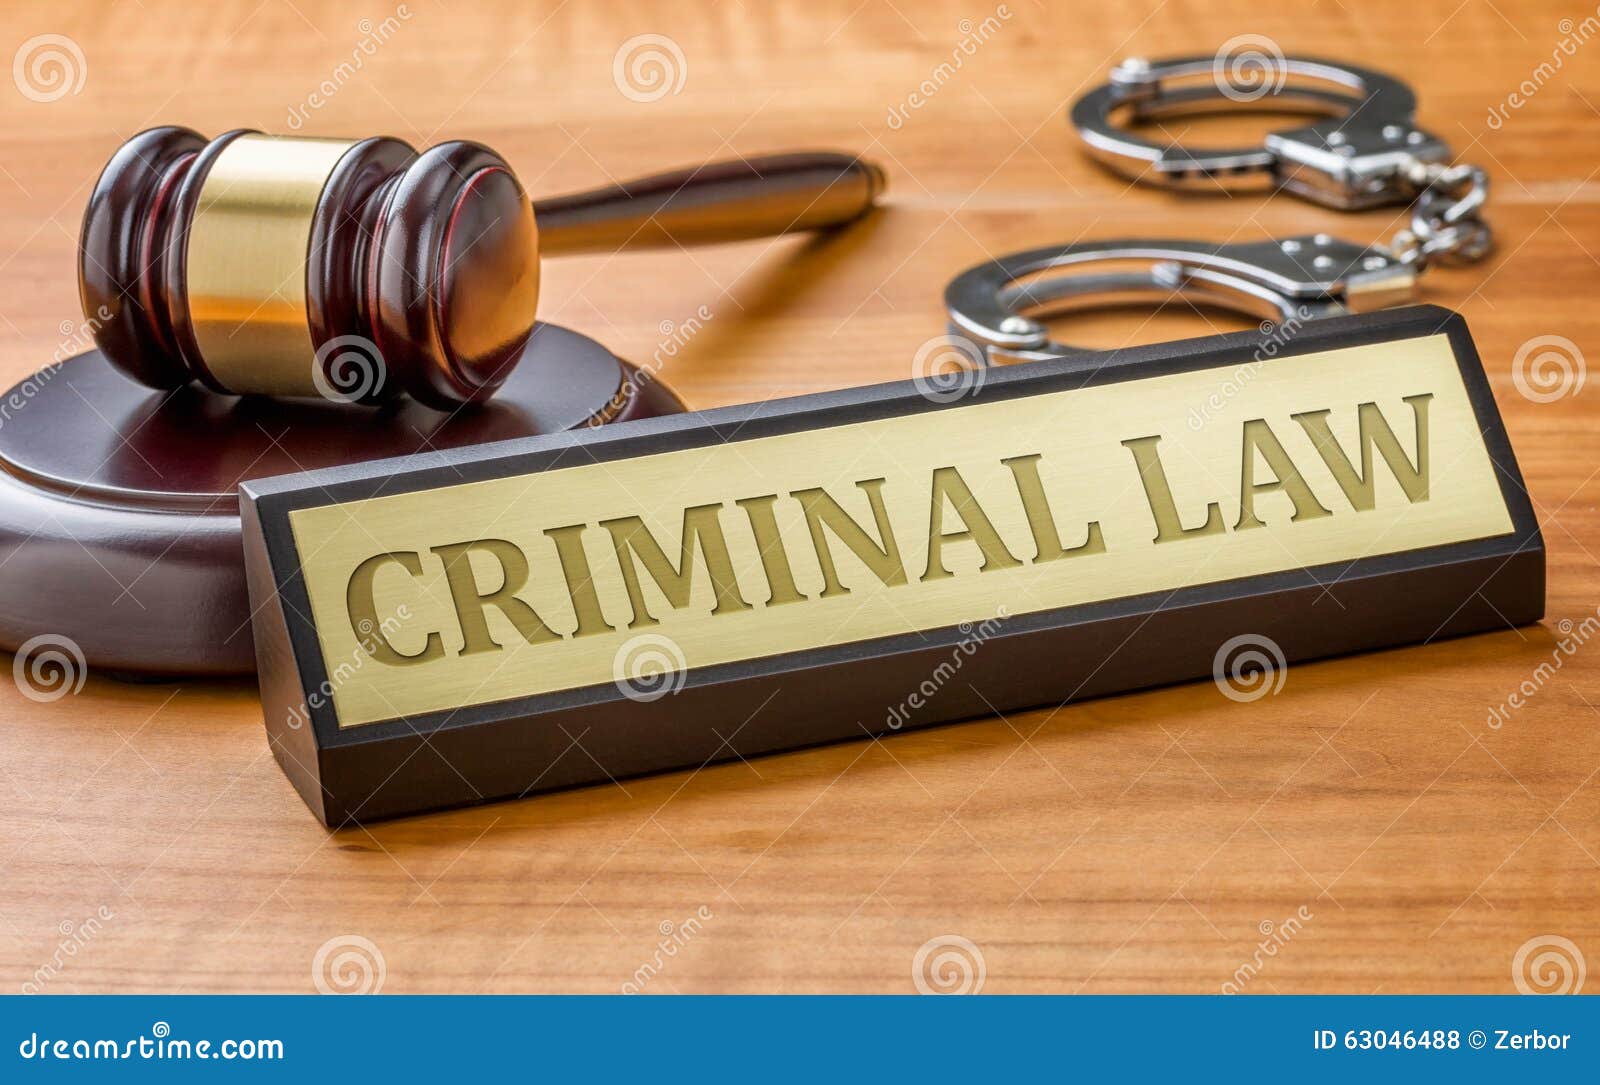 Criminal Lawyers and top rated Criminal Defense Attorney